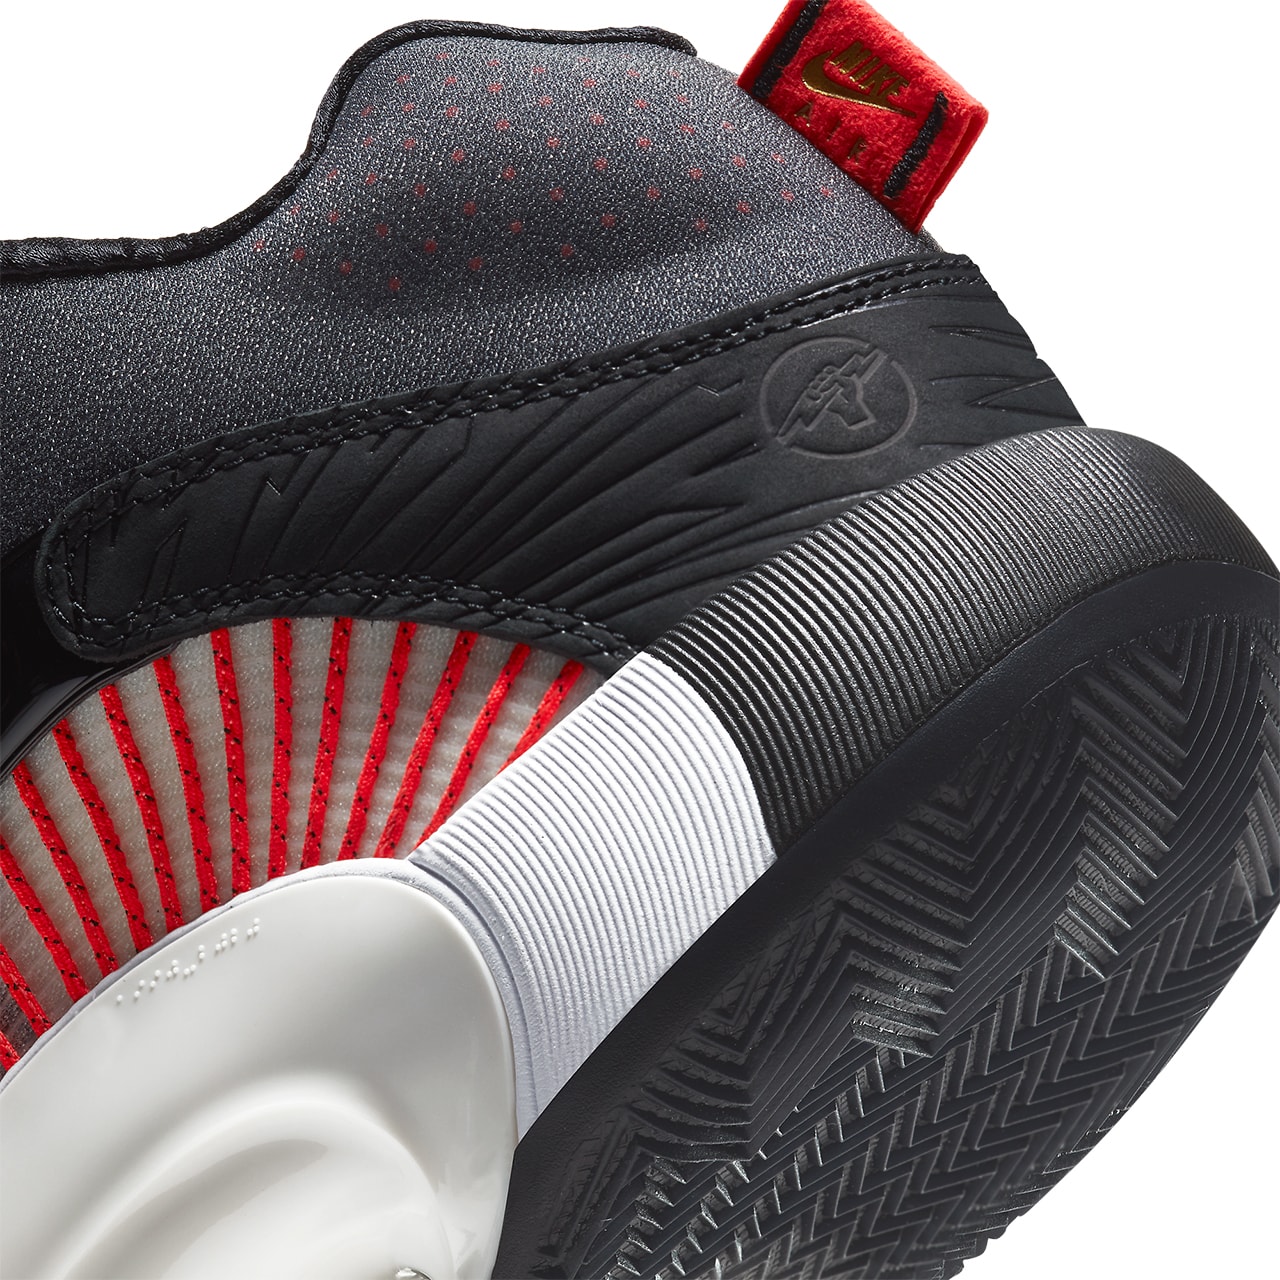 titan air jordan 35 DD4701 001 collaboration white black red gold release info date pricing photos buying guide